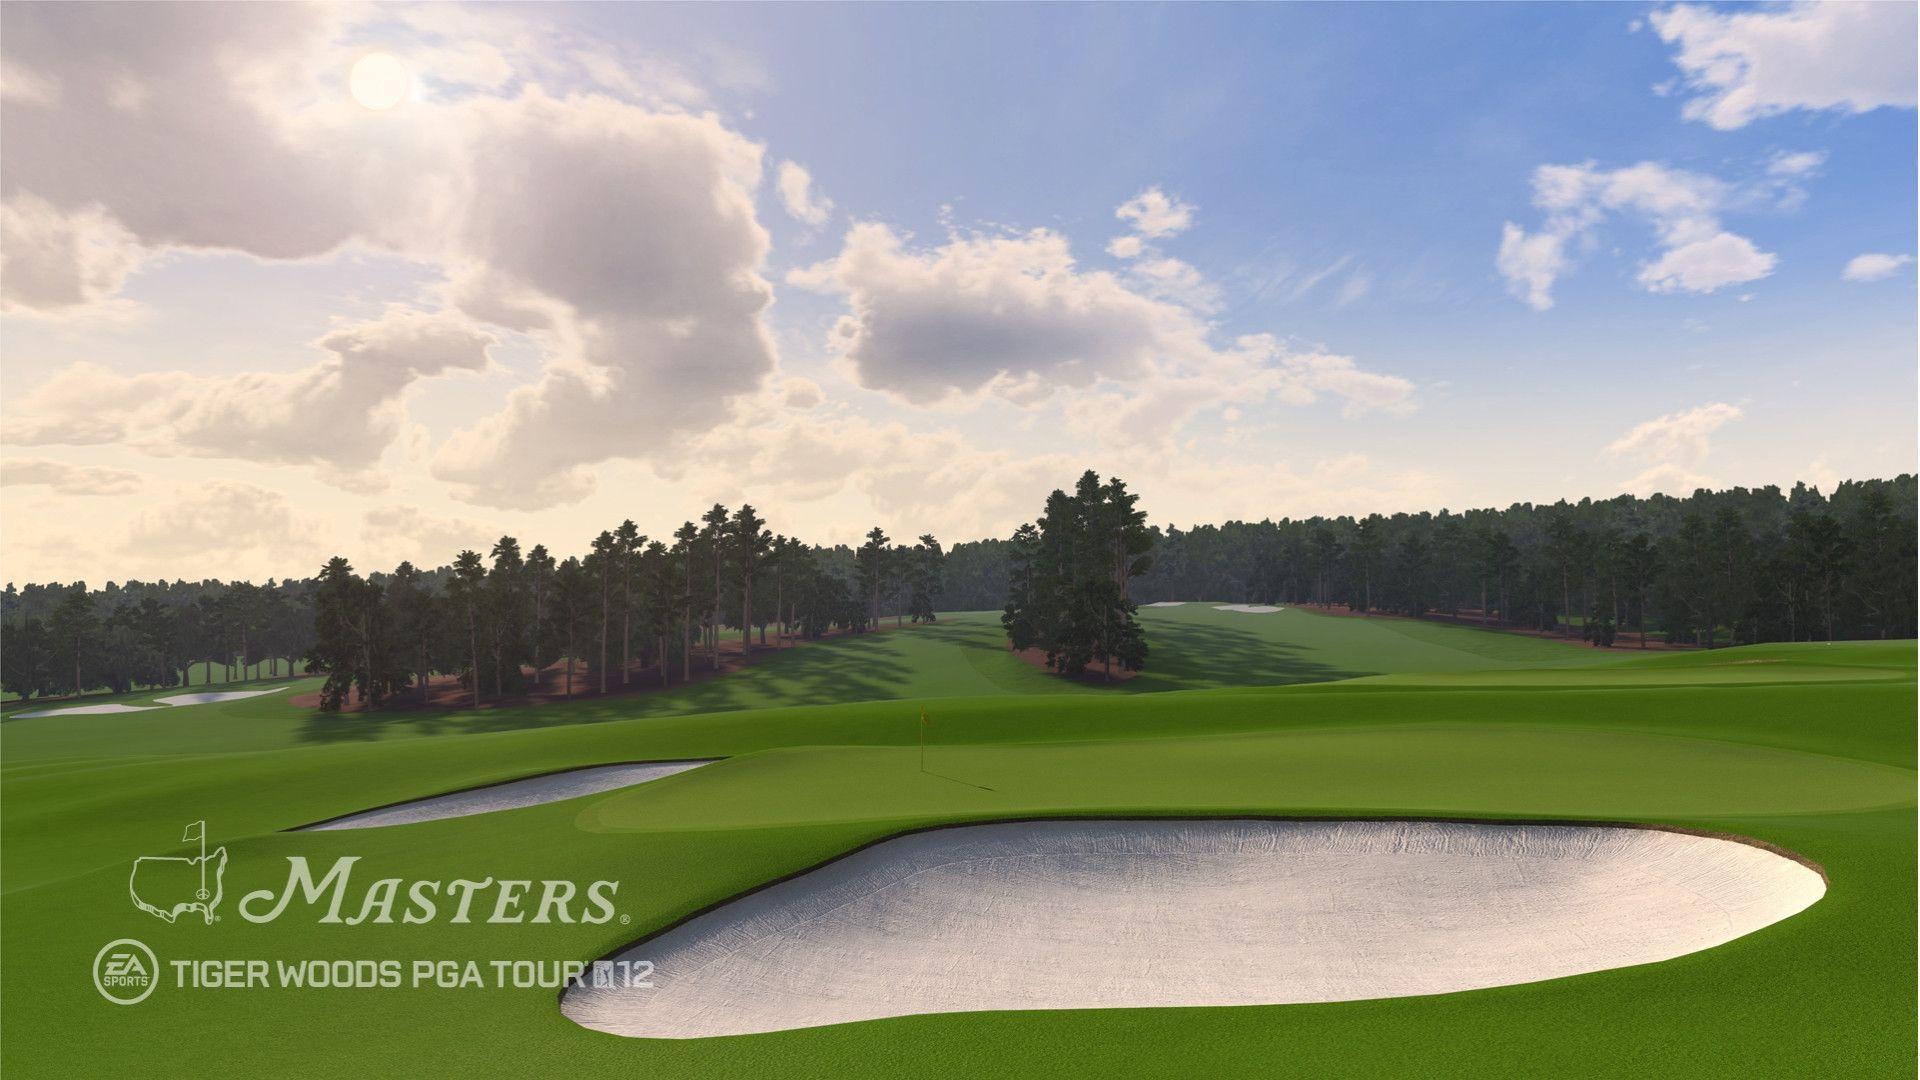 Tiger Woods PGA Tour 12 gets demo release from March 8